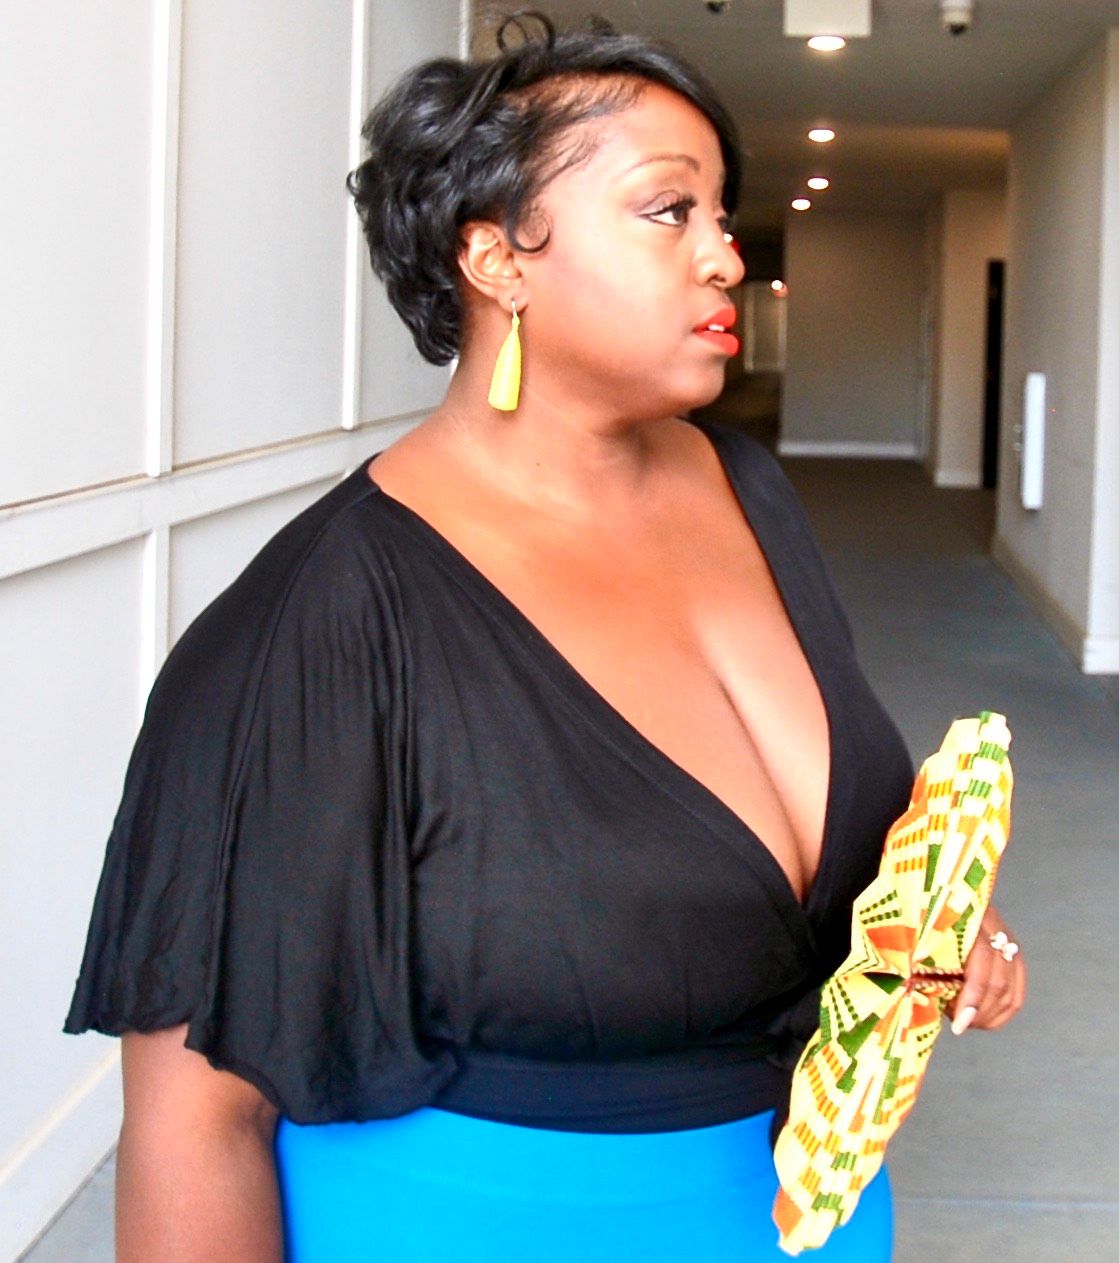 Image of Dominique Bercy. She's dressed in a black top and blue skirt holding a kente cloth-inspired fan, looking away from the camera.